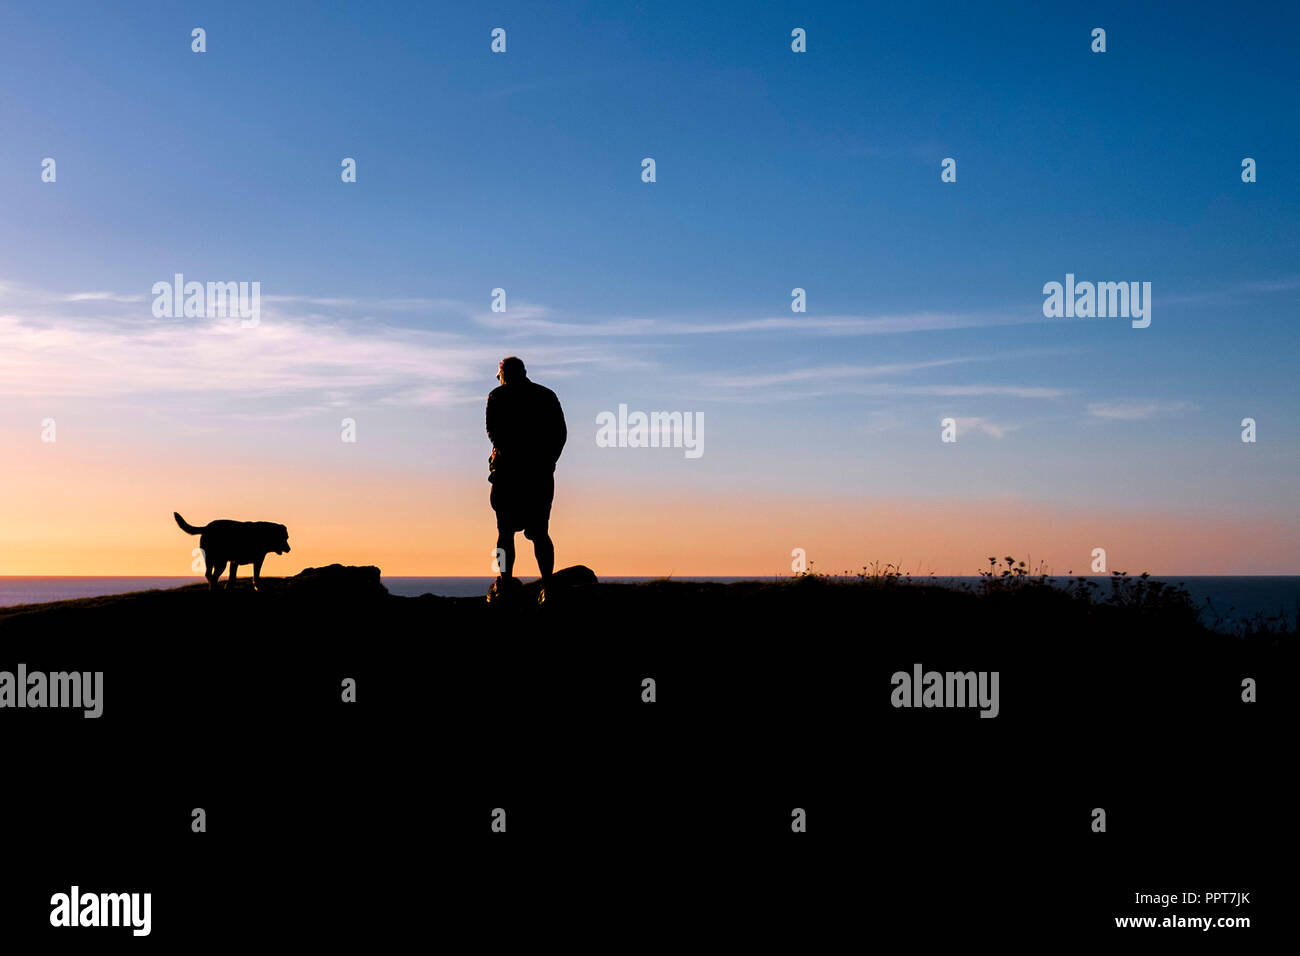 A man and his dog seen in silhouette against a setting sun in Newquay in Cornwall. Stock Photo